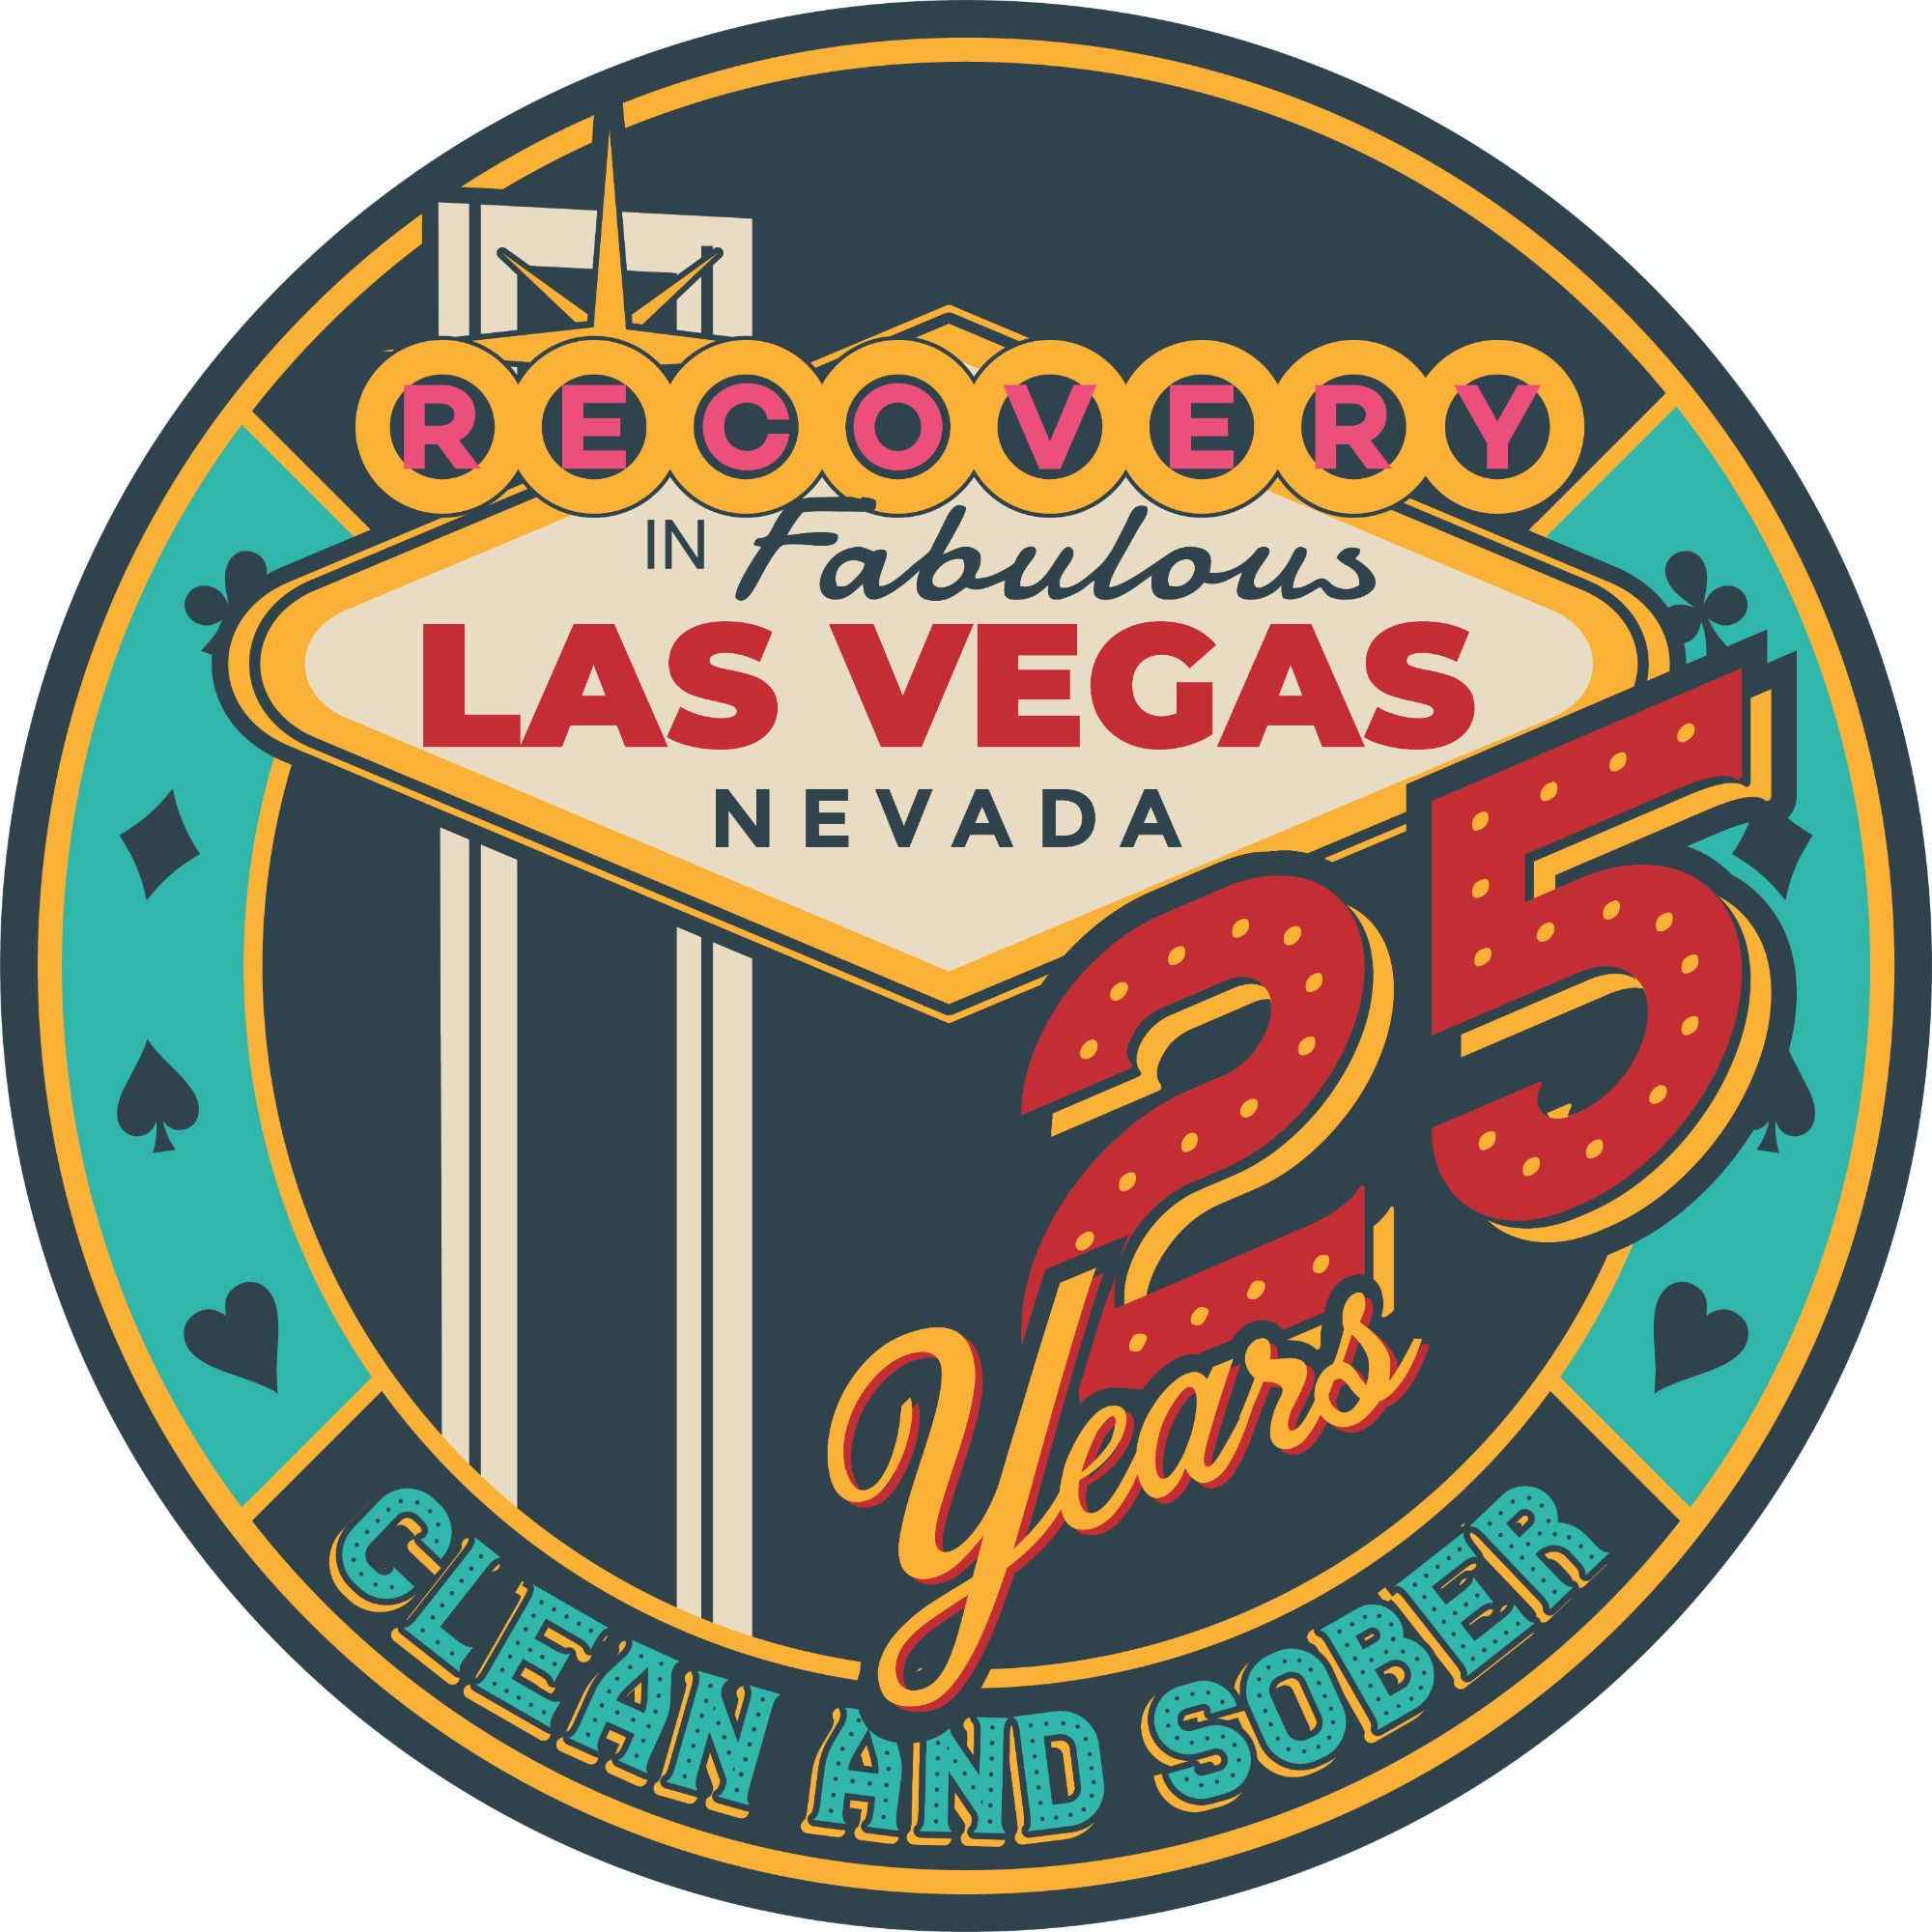 3-Pack Las Vegas AA Chips: Select Any 3 Years, 1-50 Years Sobriety